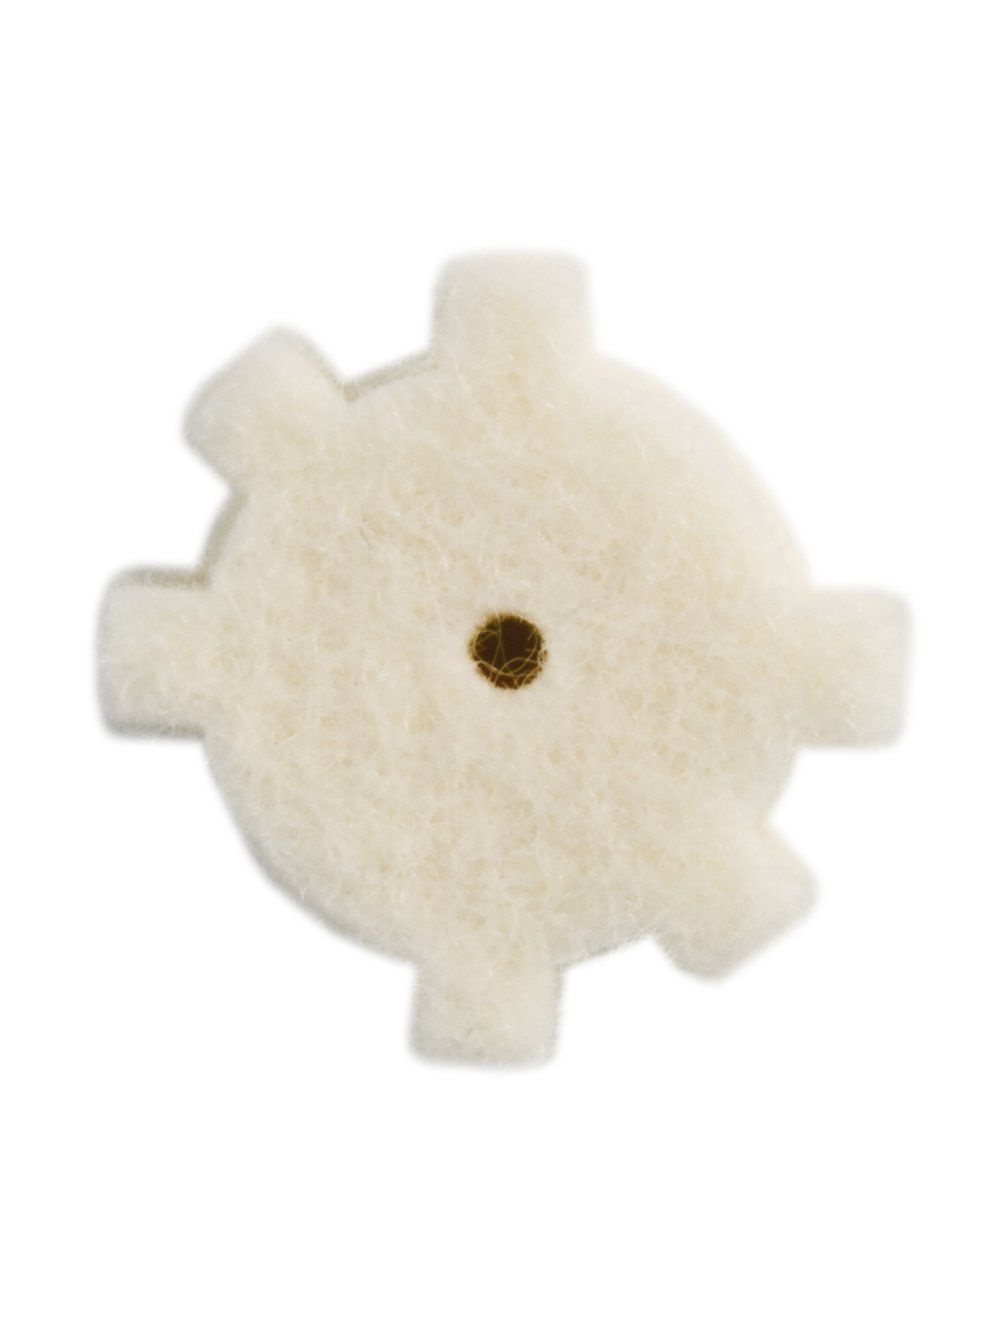 AR15 Star Chamber Cleaning Pads